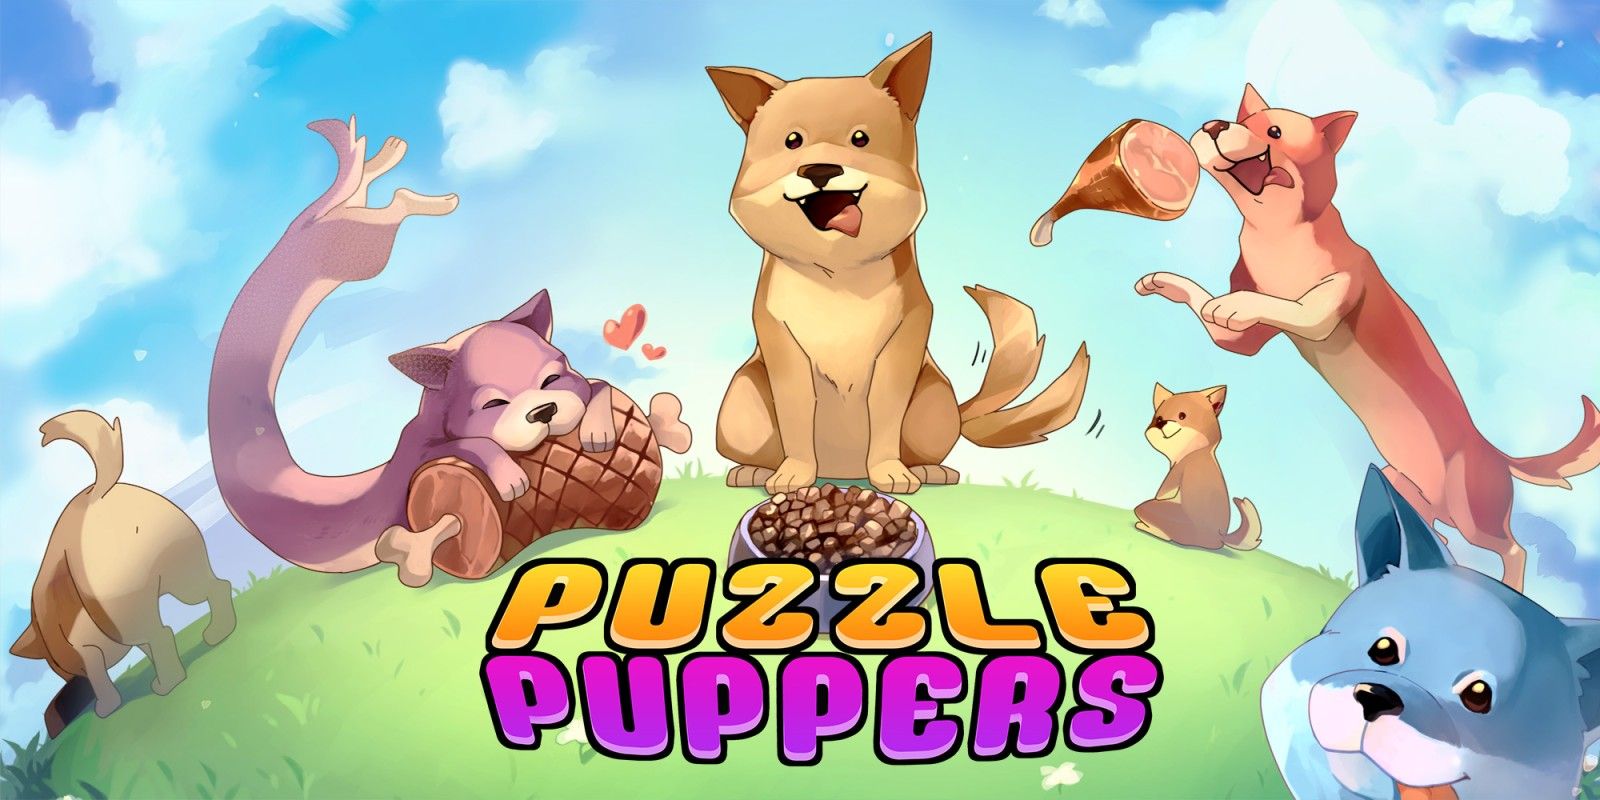 Art for the game Puzzle Puppers